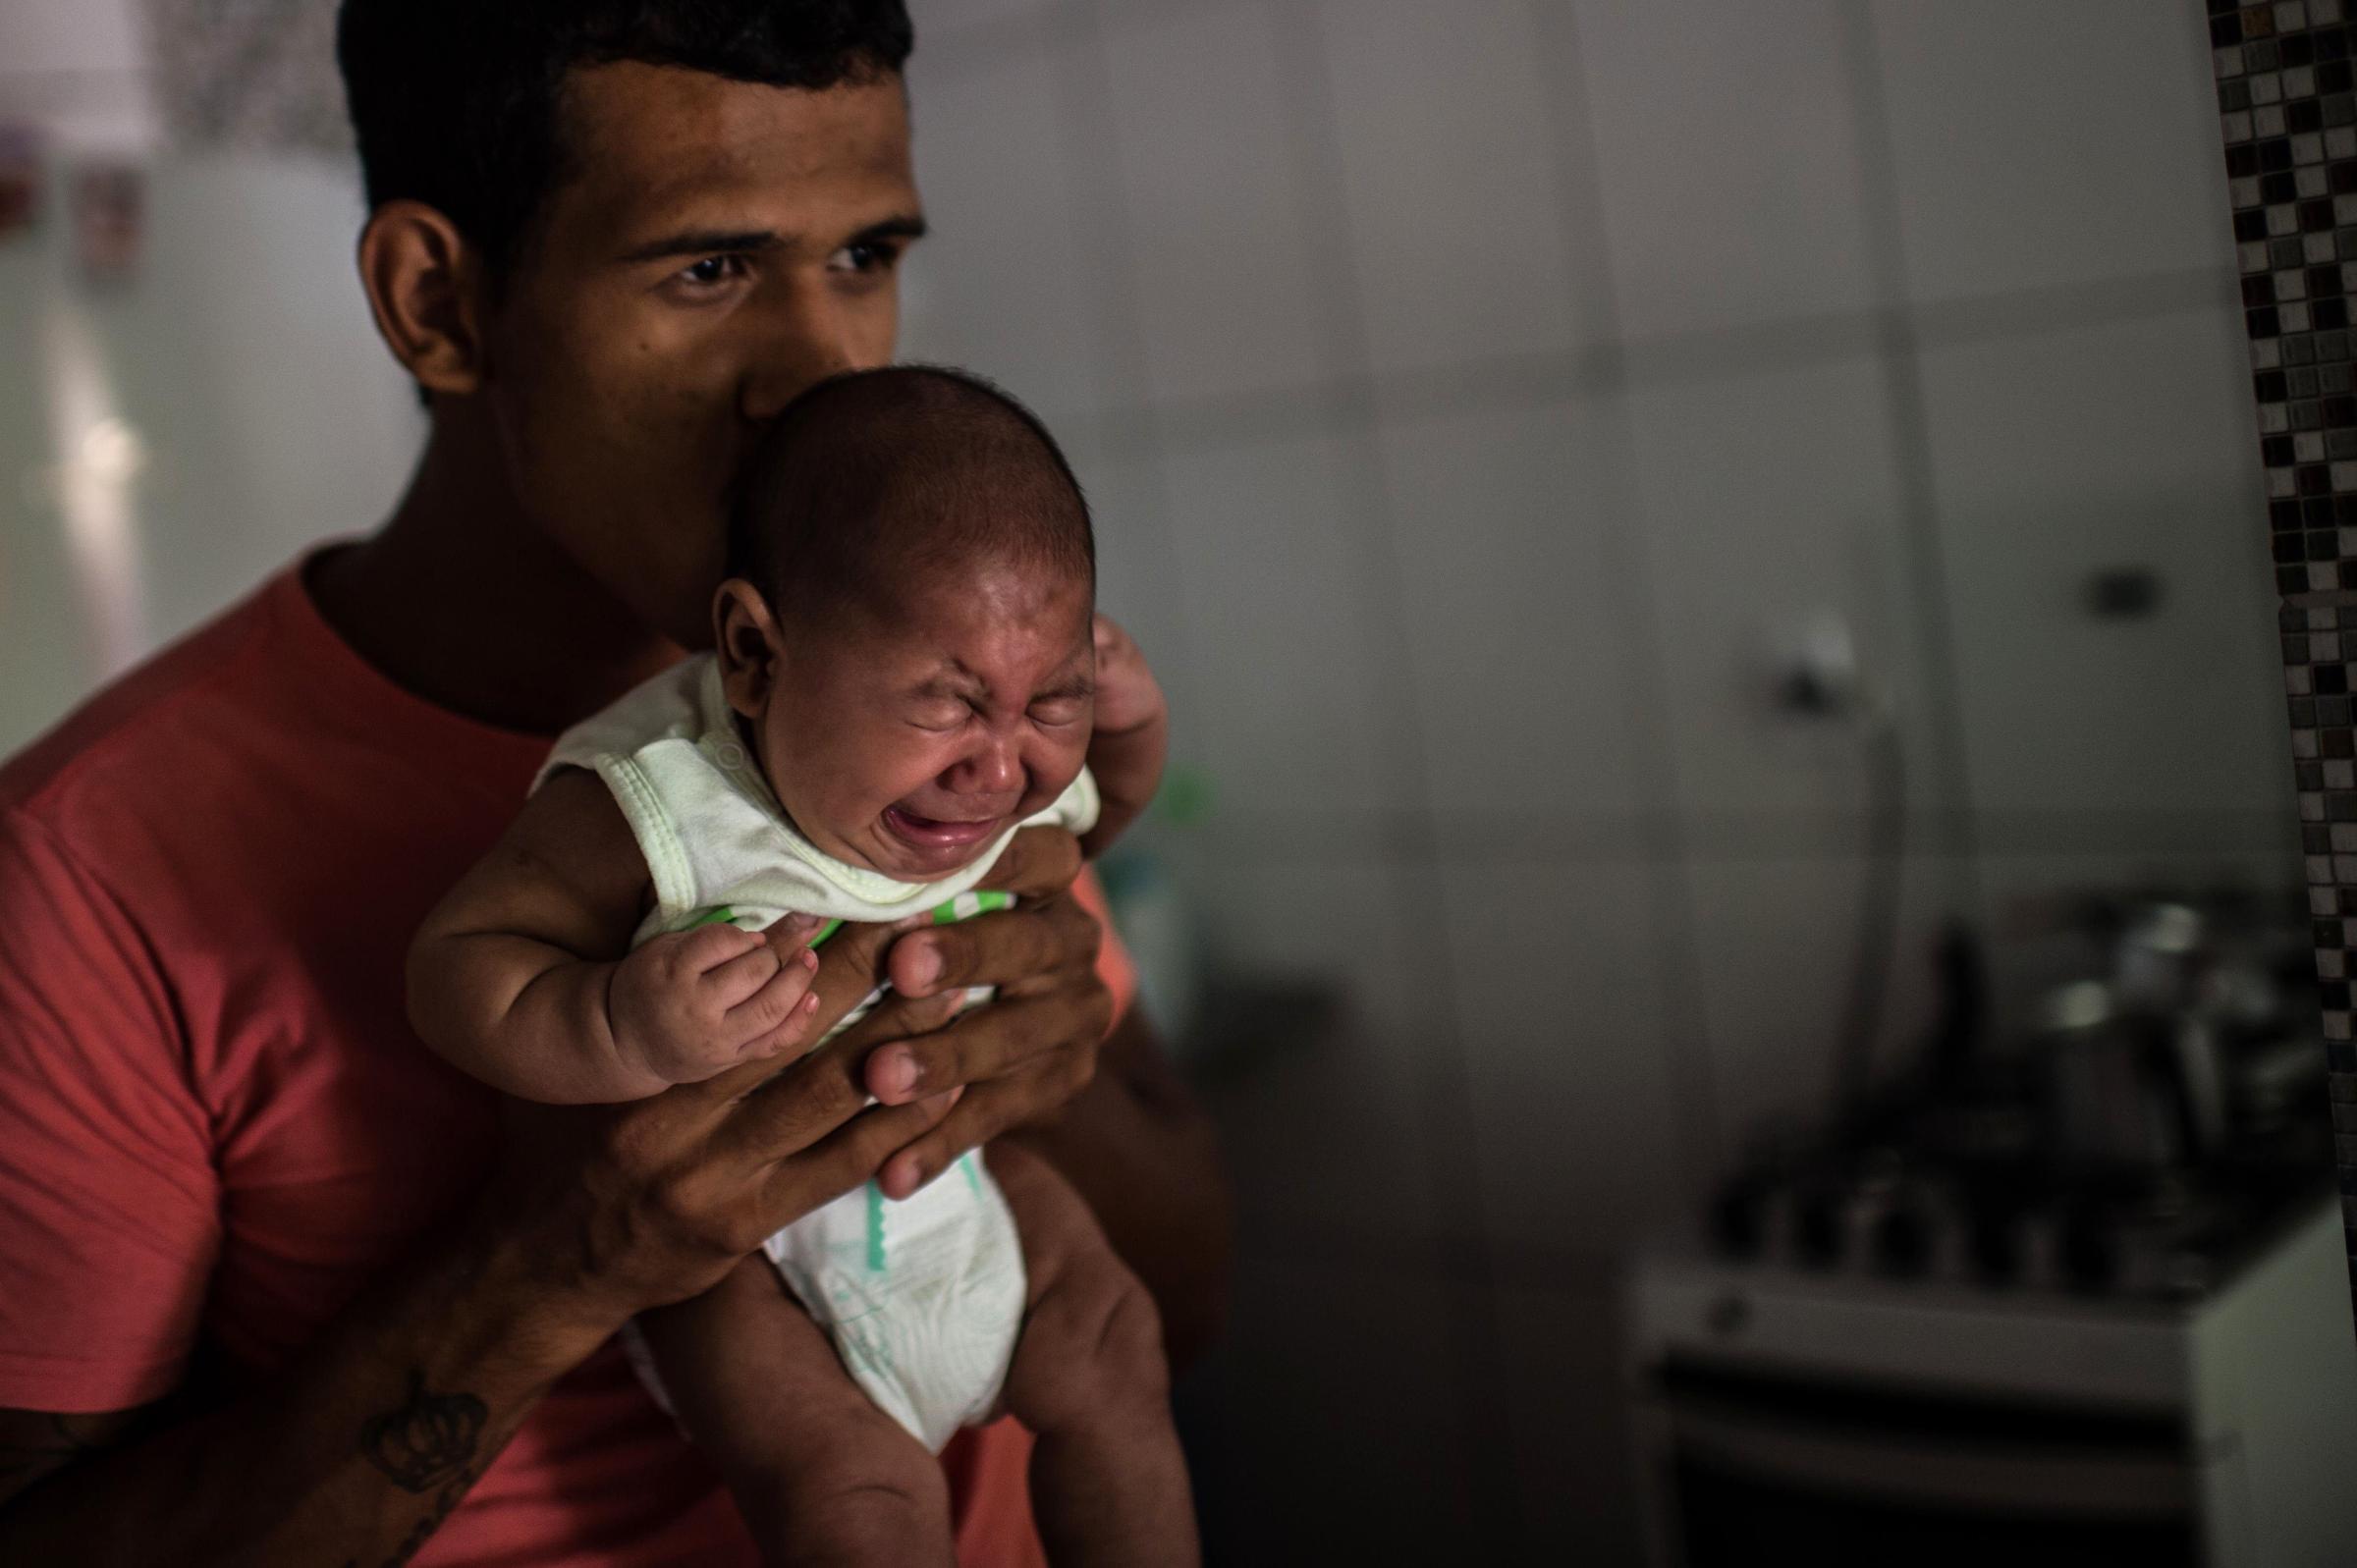 Matheus Lima, 22, holds his two-year-old son, Pietro, who suffers from microcephaly, at his home in Salvador, Brazil, Jan. 28 , 2016.